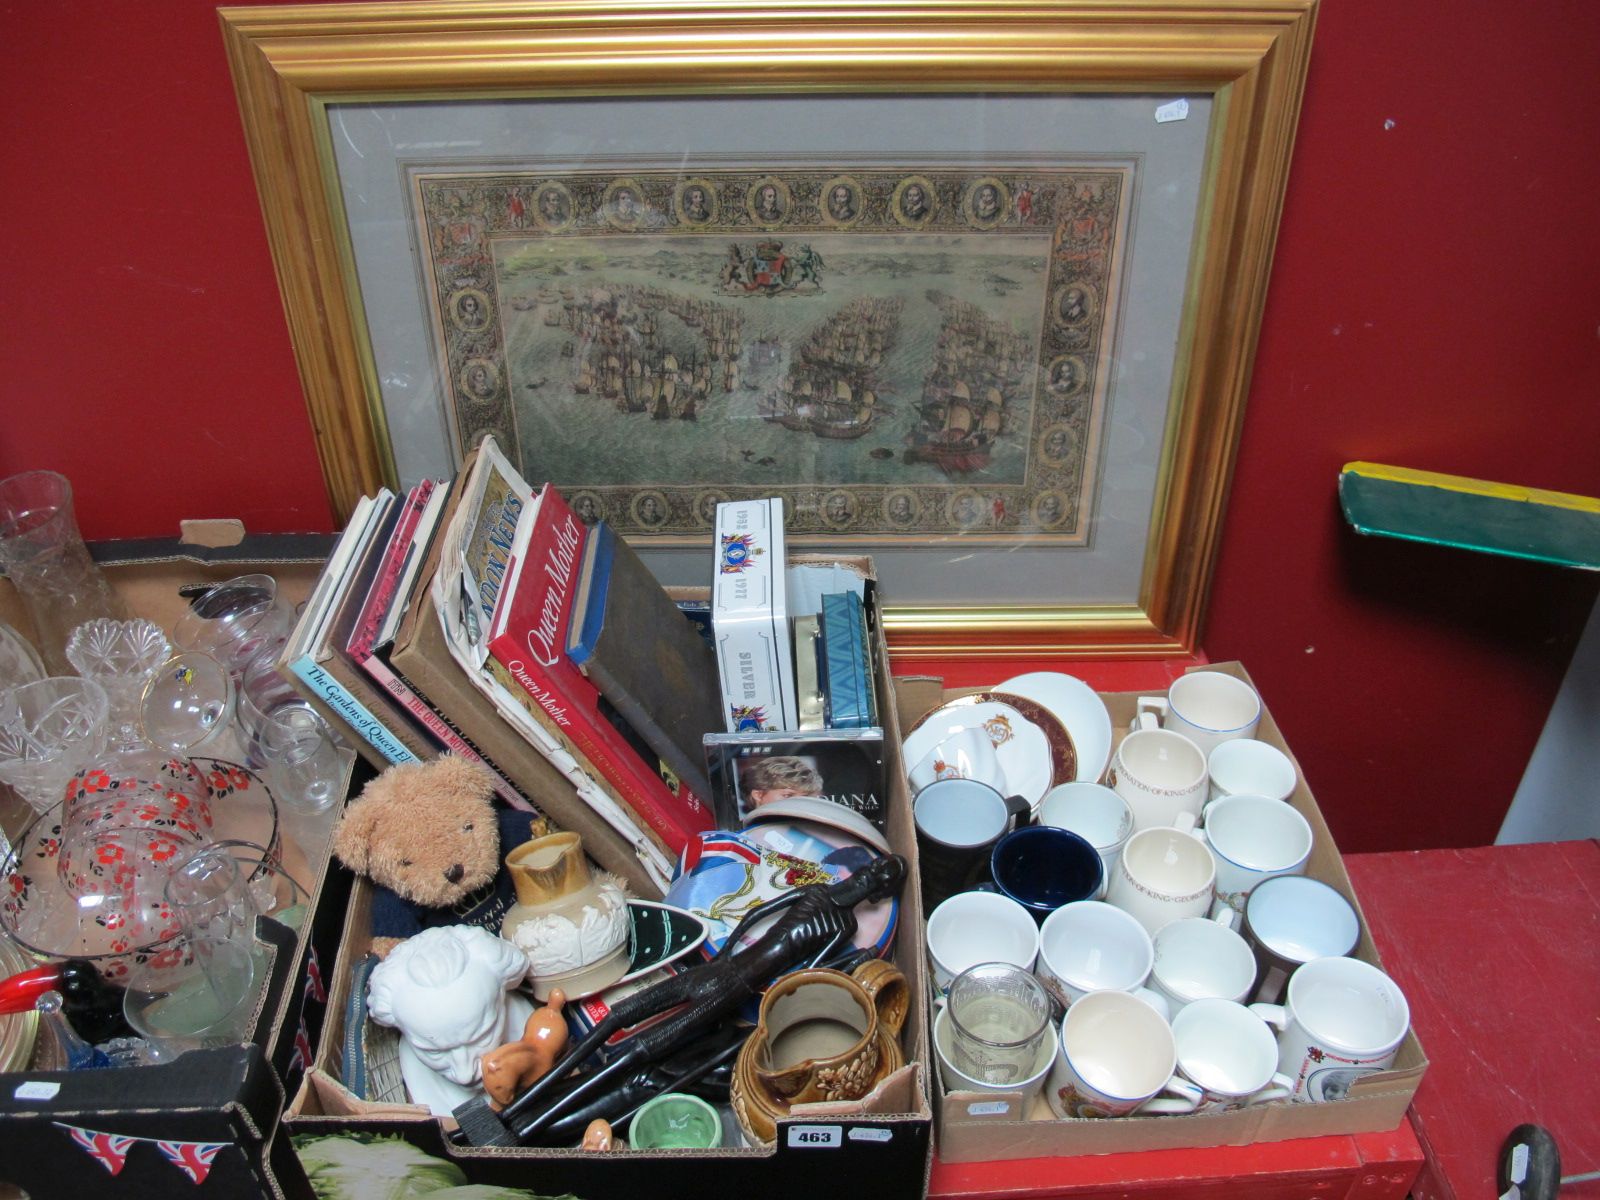 Royal Commemorative Cups and Saucers, mugs, storage tins, newspapers, books, CD etc; together with